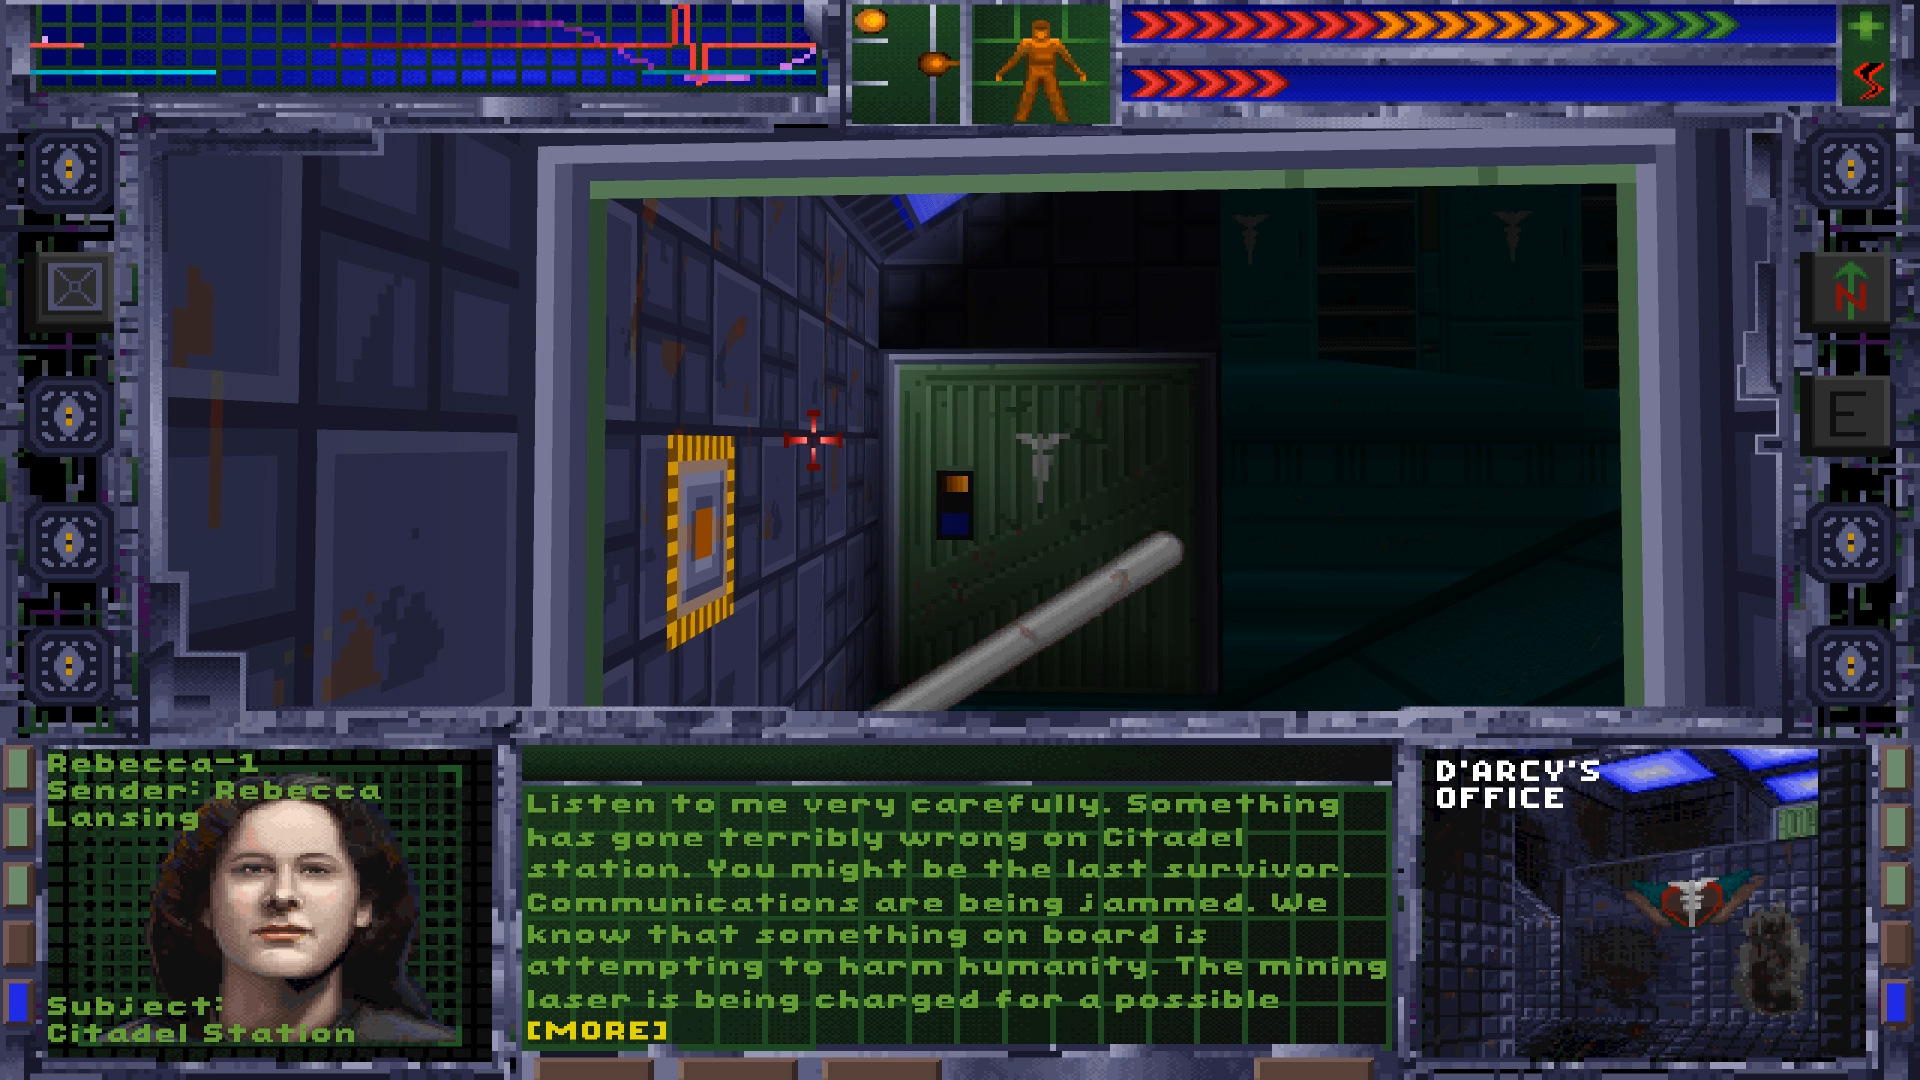 system shock 2 higher levels of research